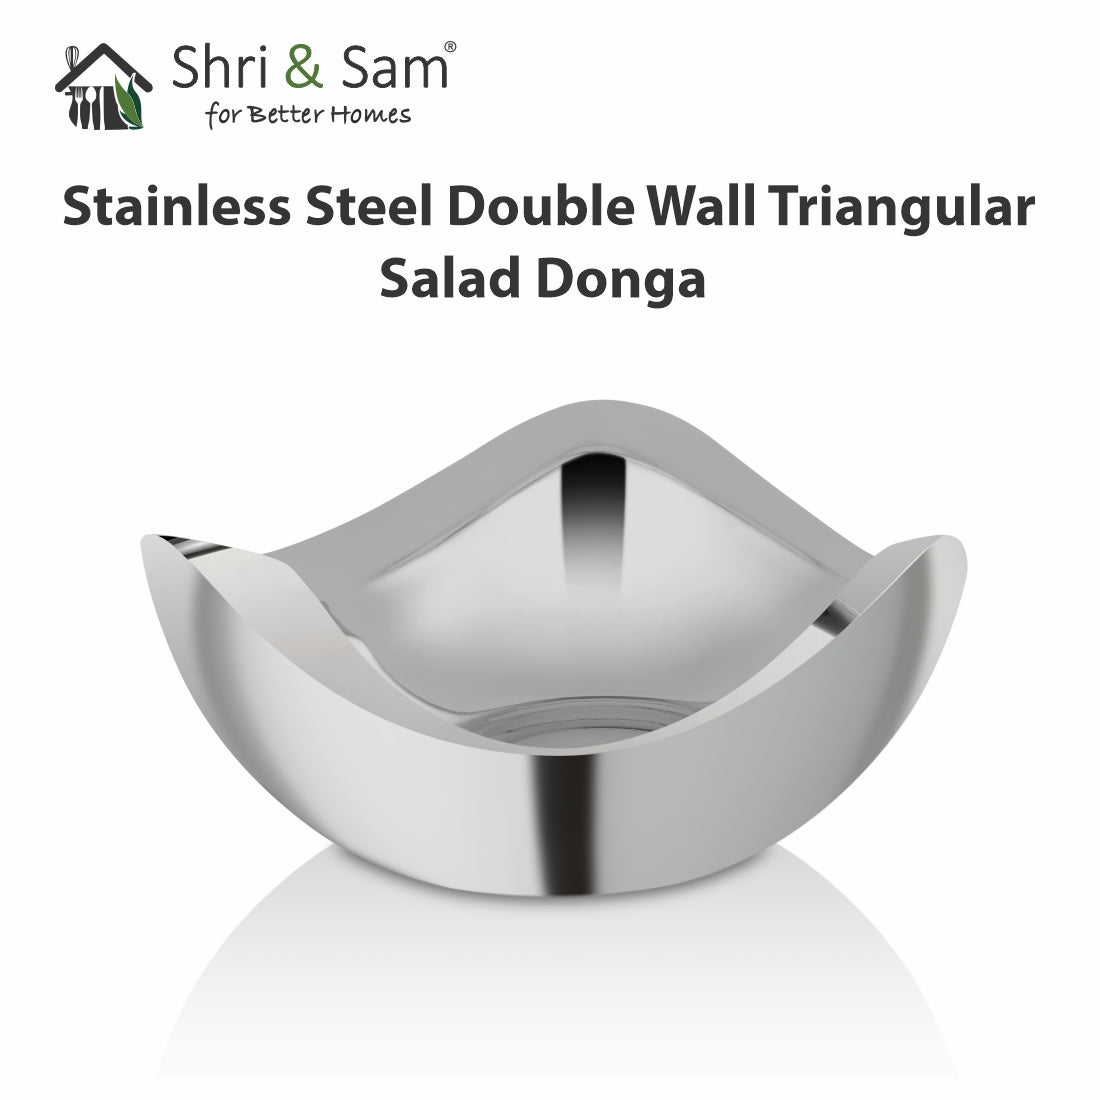 Stainless Steel Double Wall Triangular Salad Donga